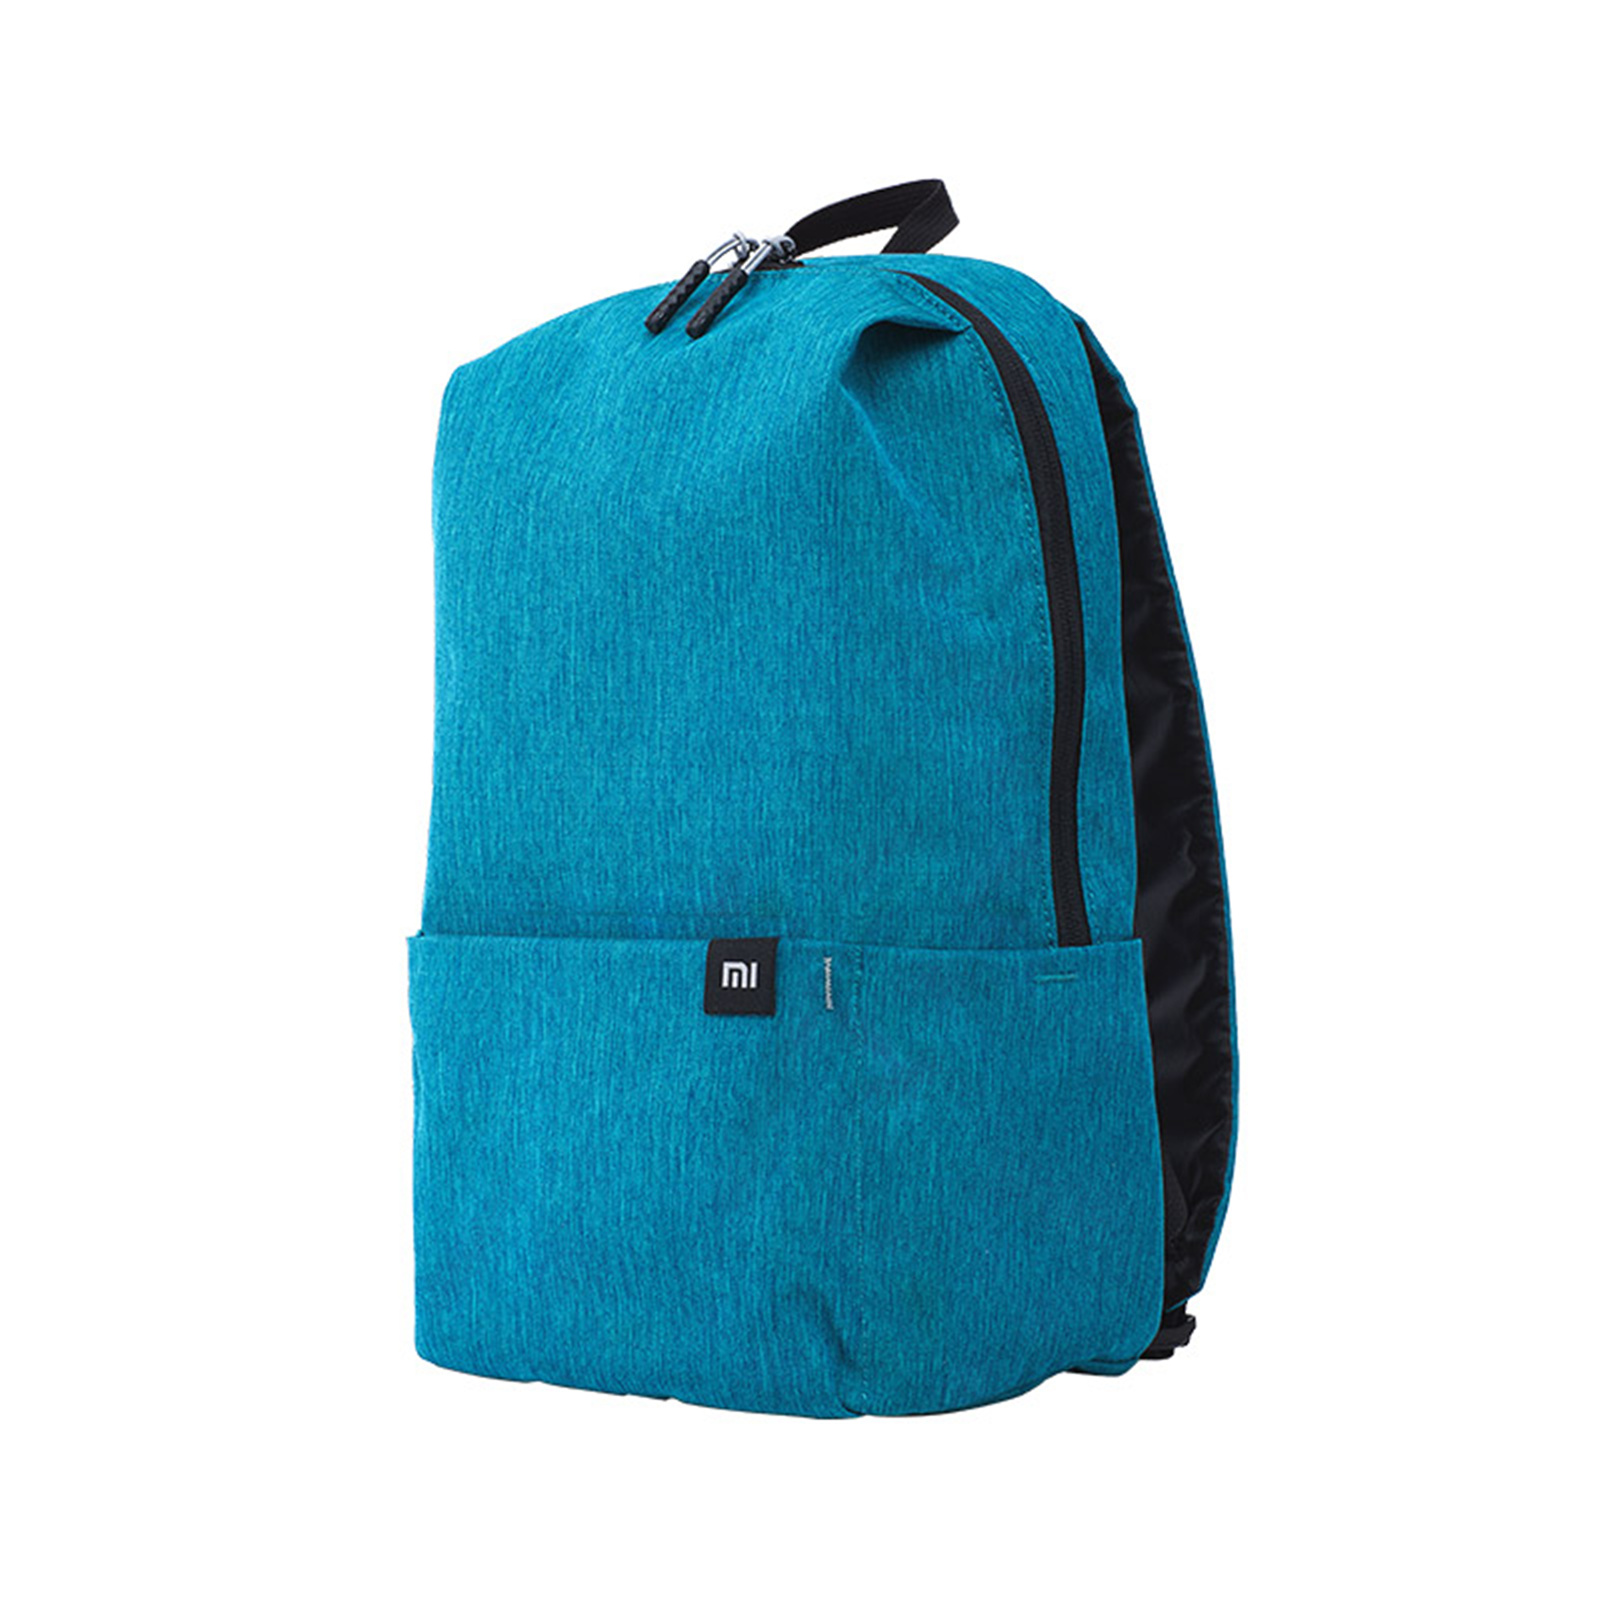 Xiaomi Mi Casual Daypack - Bright Blue - Compact Backpack 10L Capacity ...